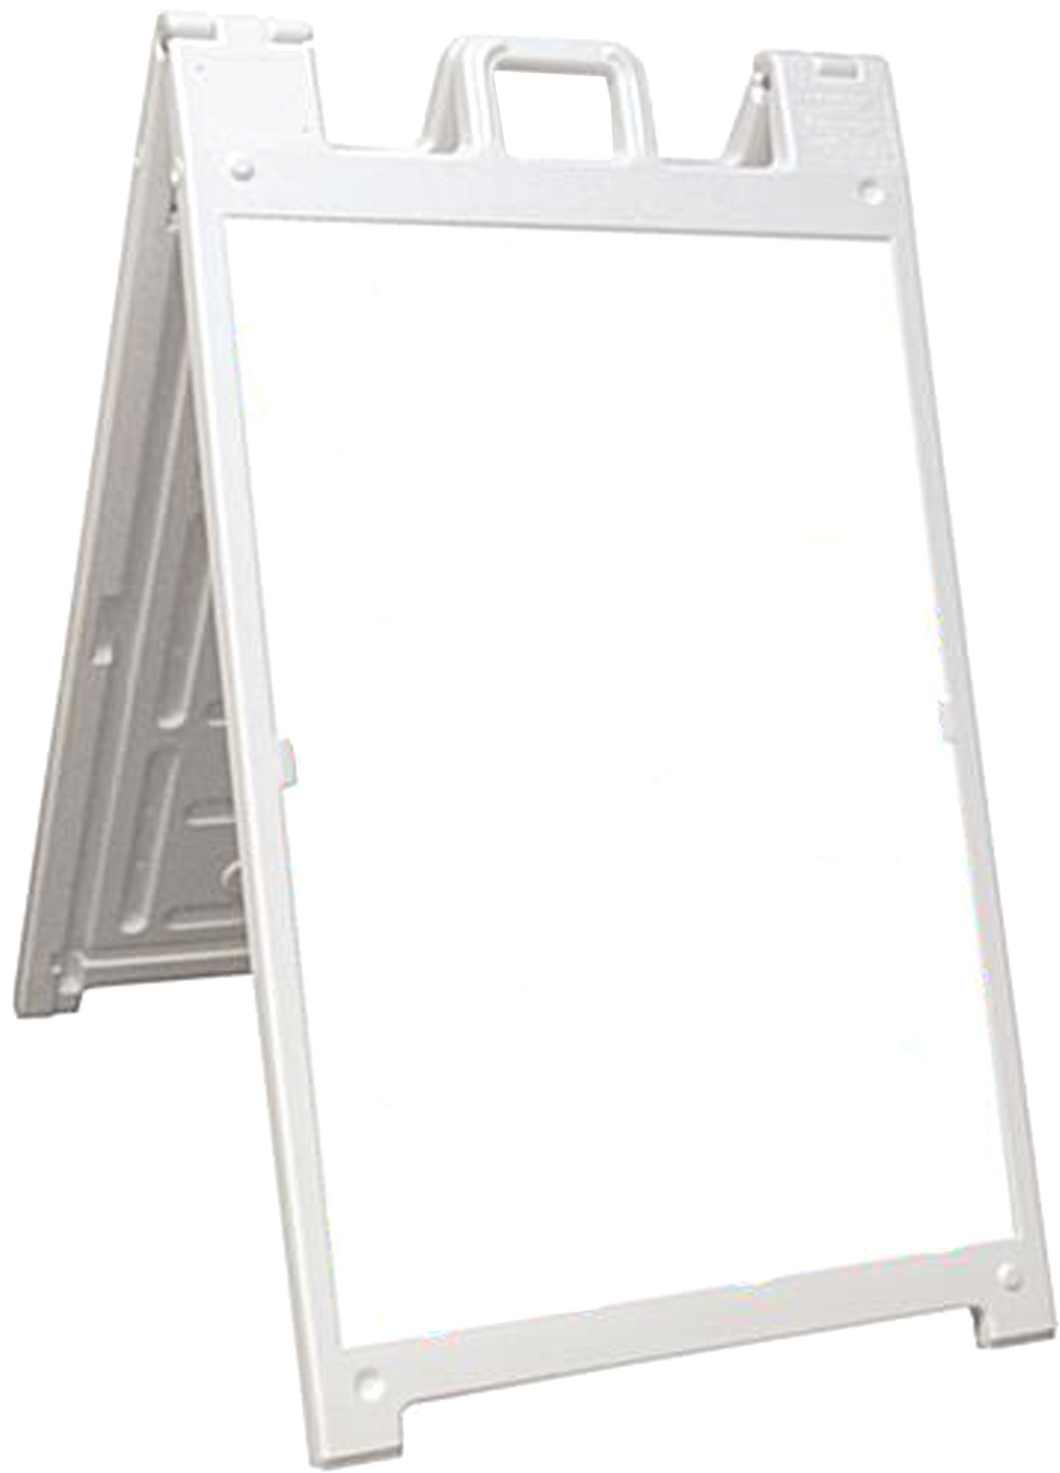 Two-Sided Sandwich Board Sign with Removable panels.